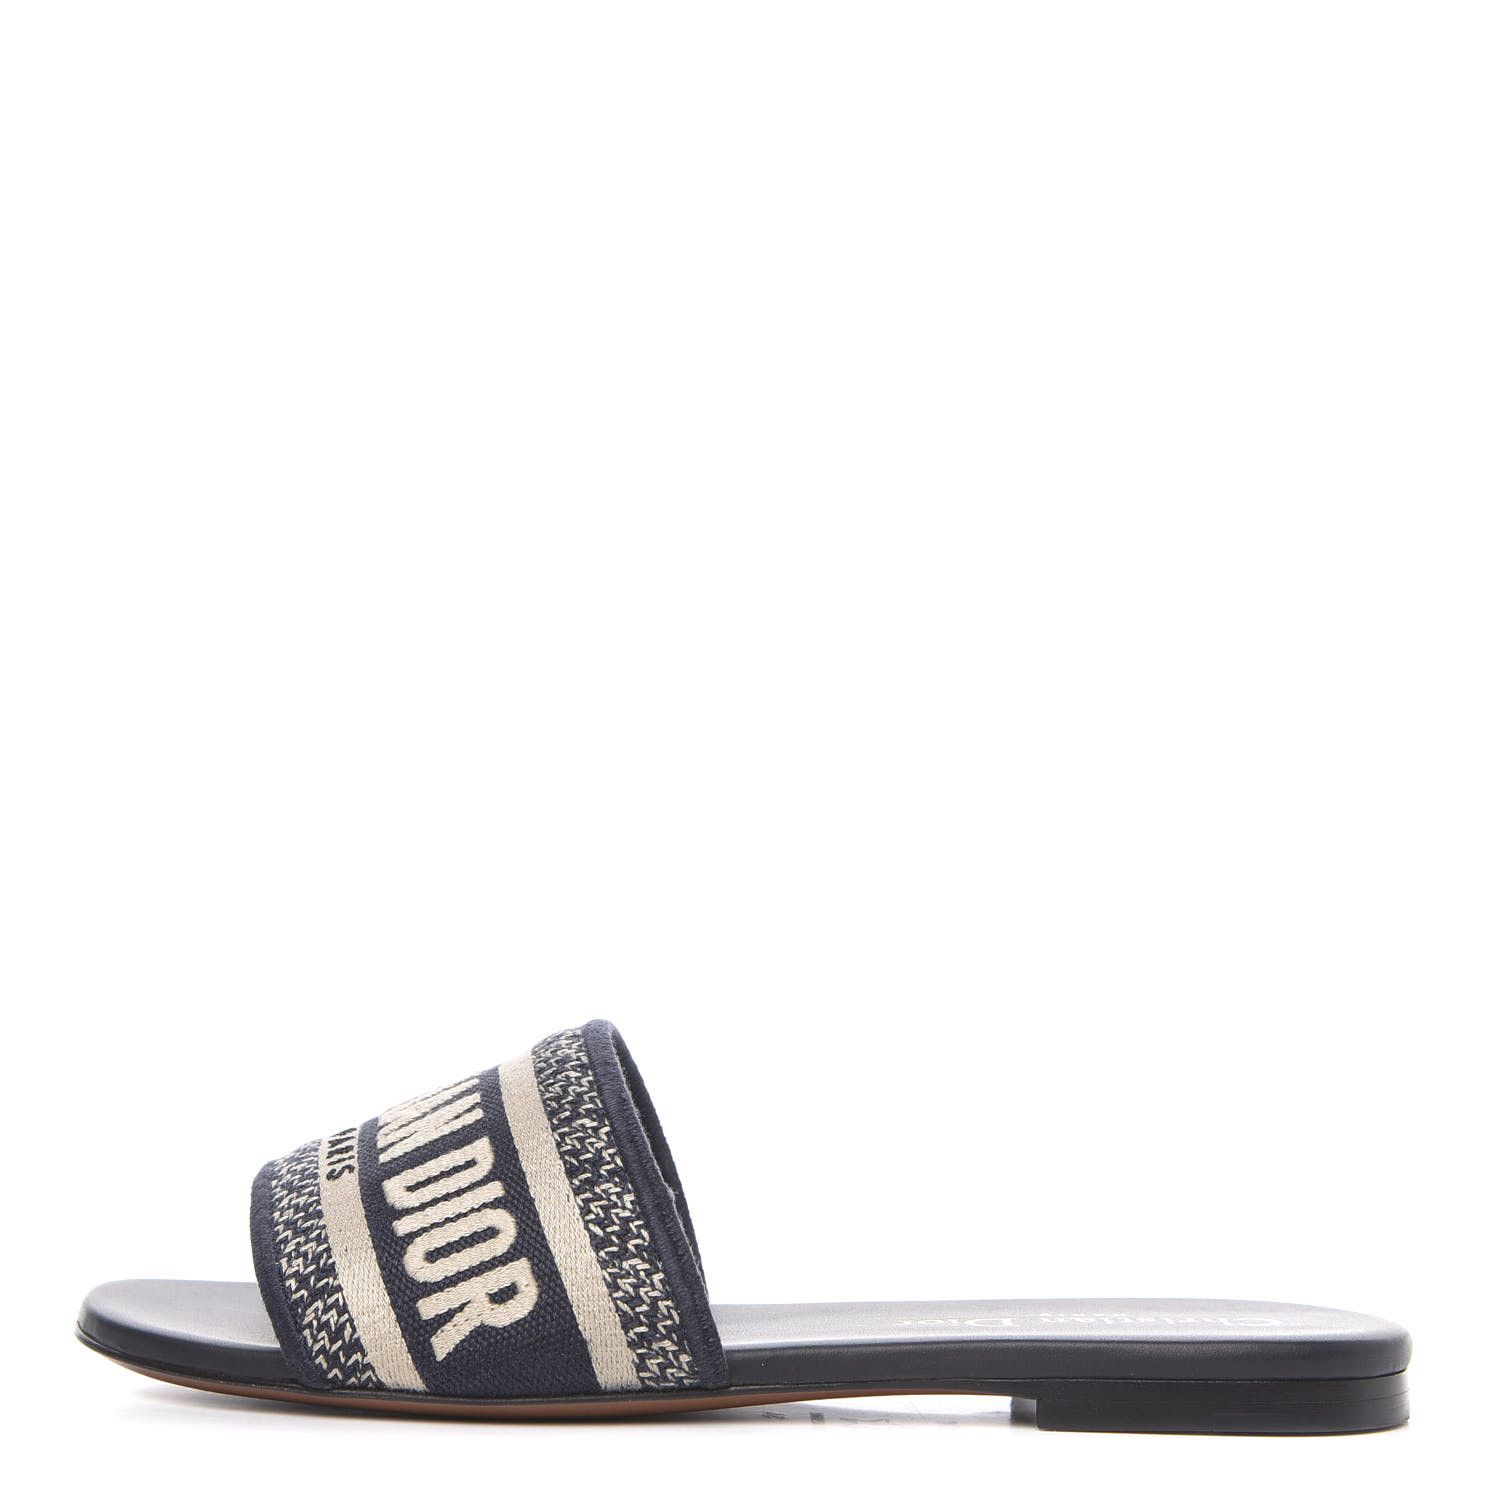 Canvas Embroidered Dway Mules Slide Sandals 34 Deep Blue | Fashionphile